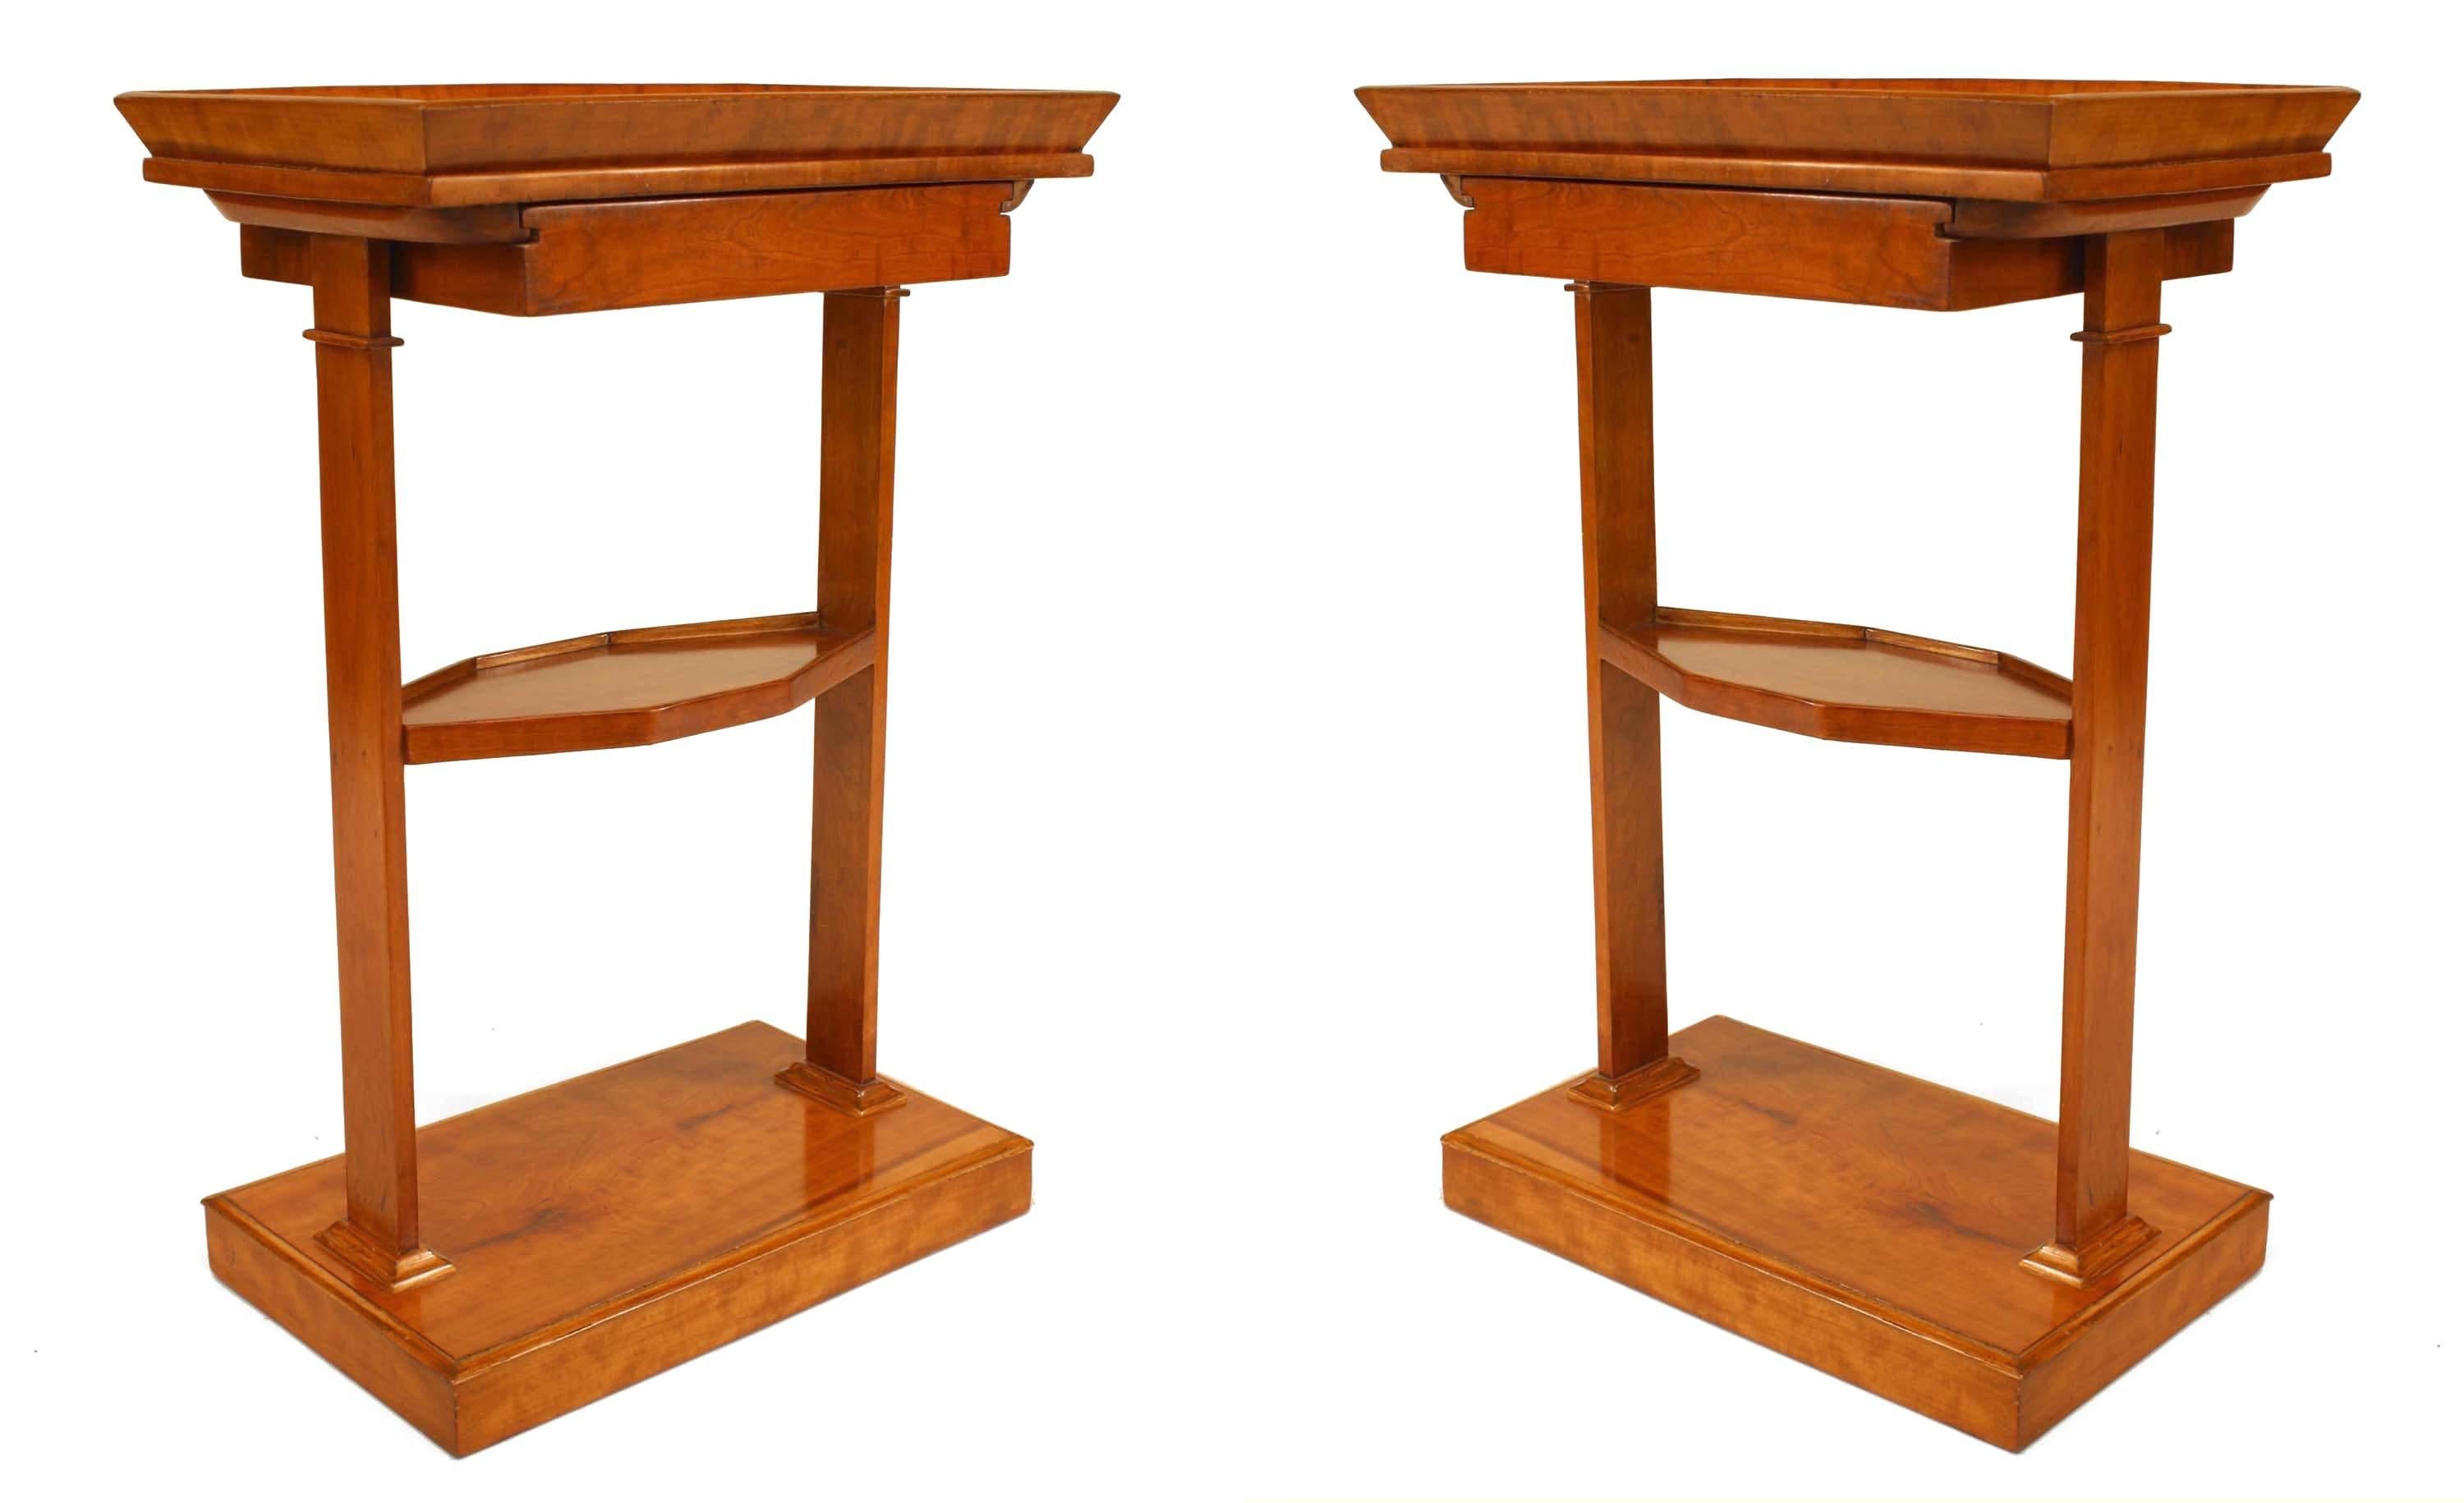 Pair of Austrian Biedermeier (19th Century) cherrywood rectangular end tables with a gallery top and a drawer with a center shelf supported on a platform base. (PRICED AS Pair)
